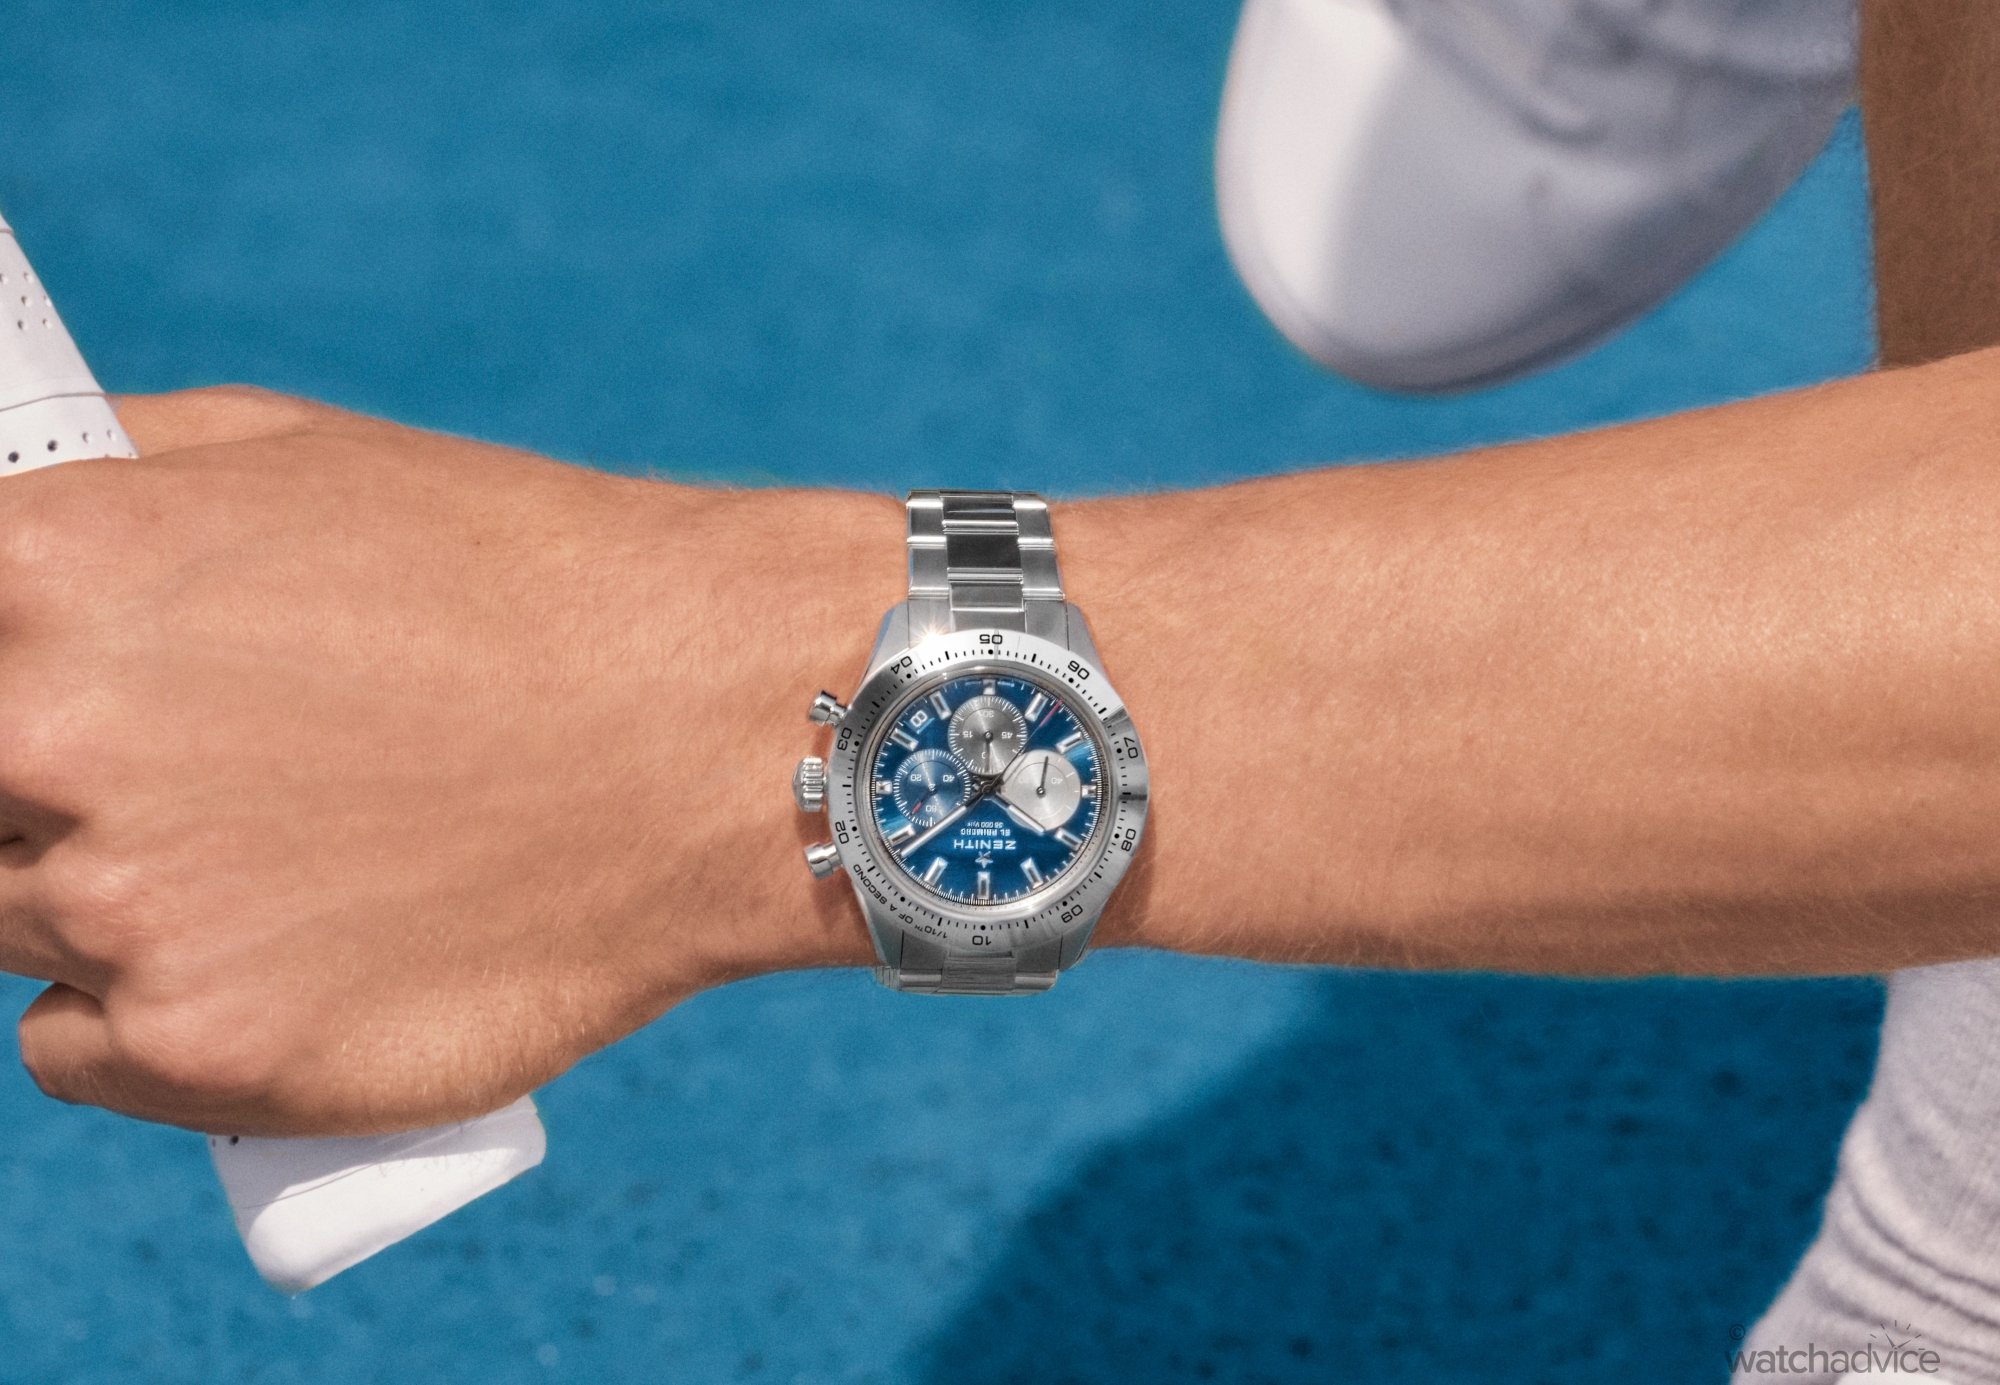 INTRODUCING: The Zenith Chronomaster Sport Now With Polished Steel Bezel &  Metallic Blue Dial 